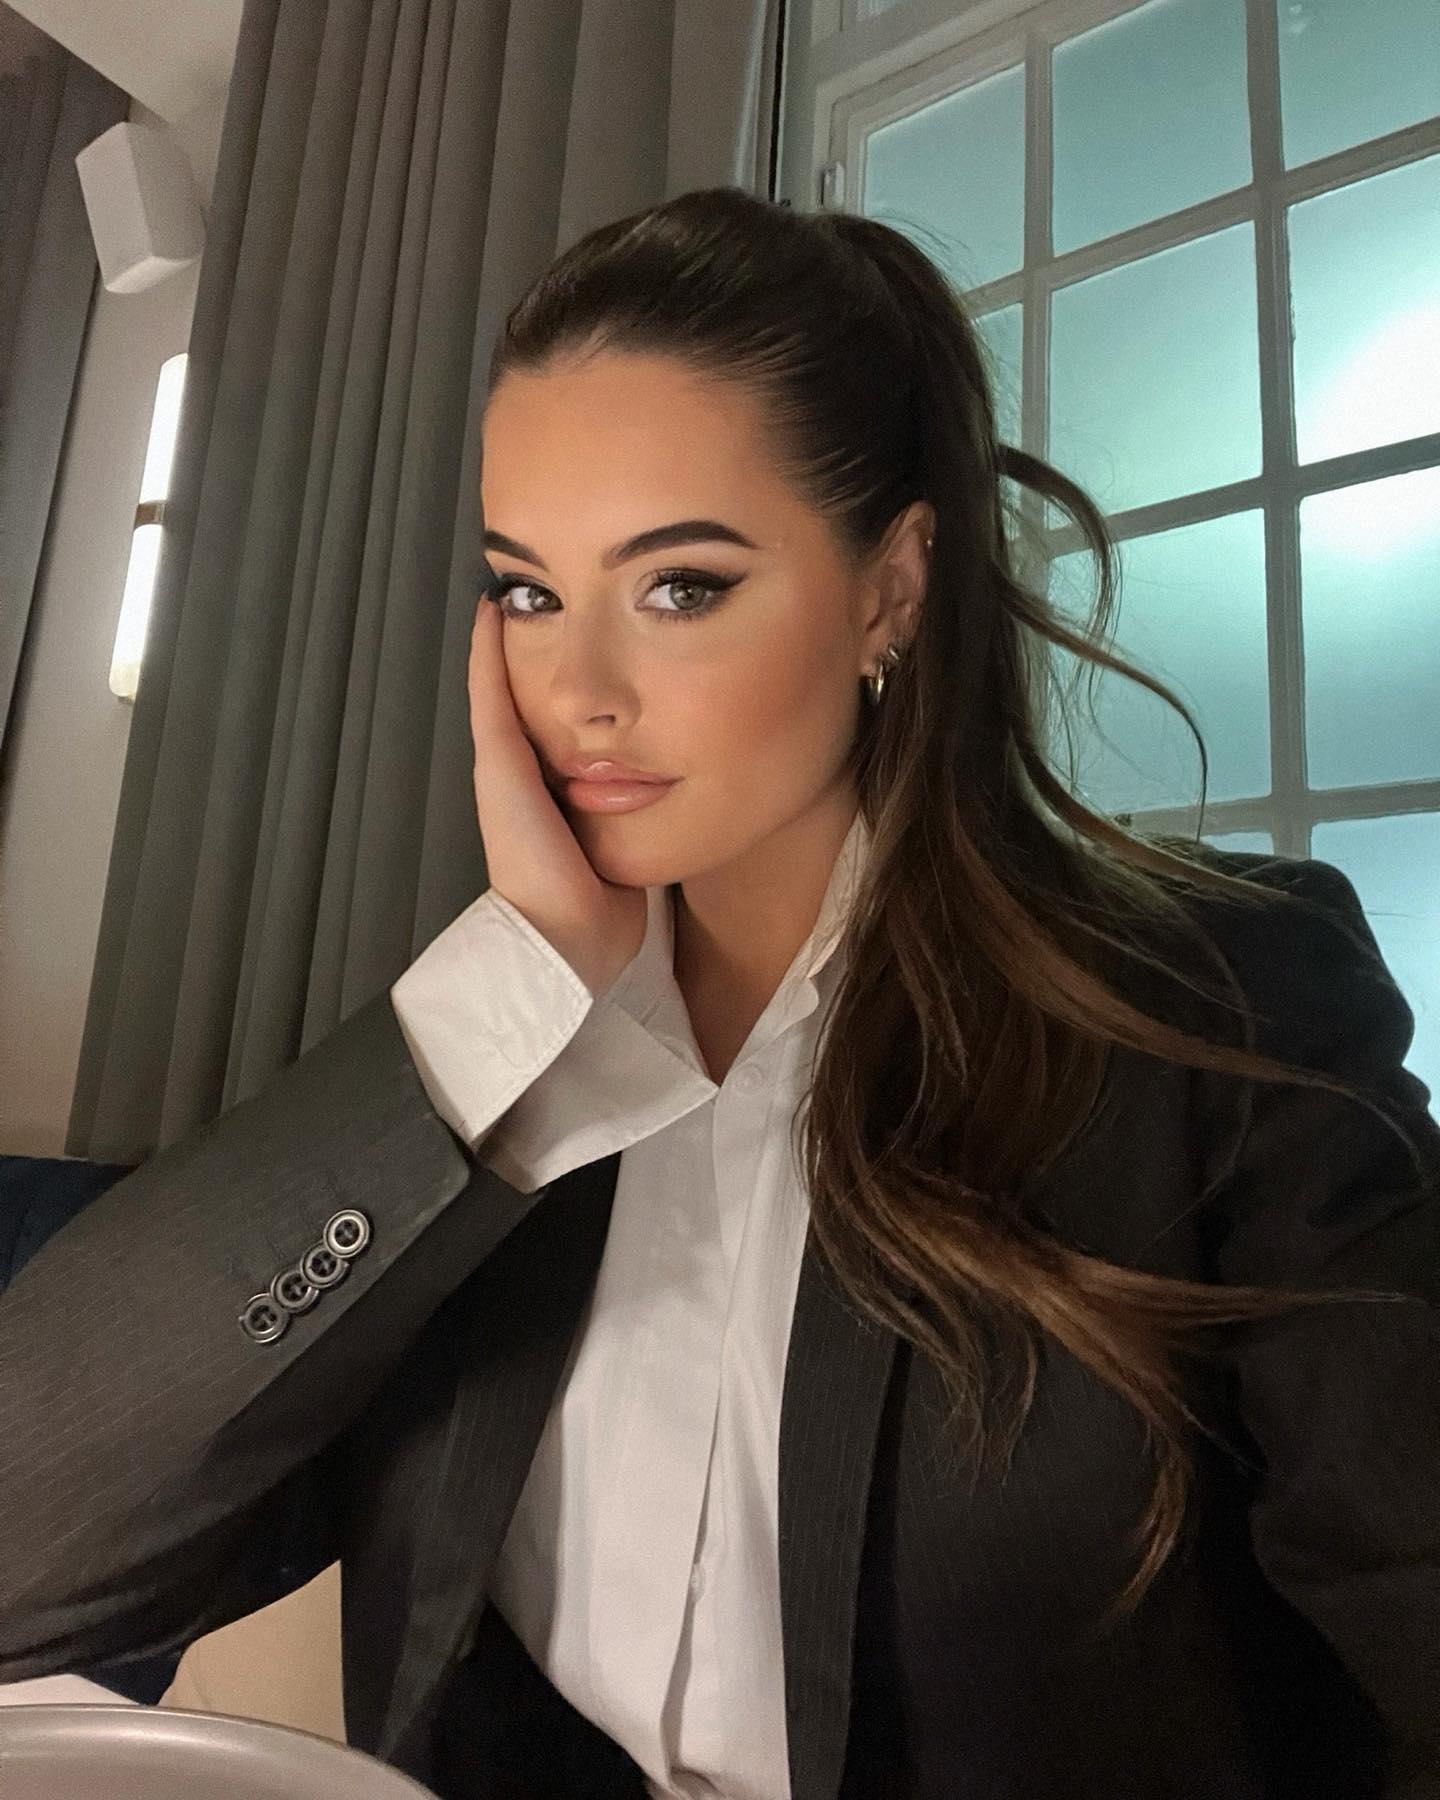 Sophie Stonehouse poses in a suit